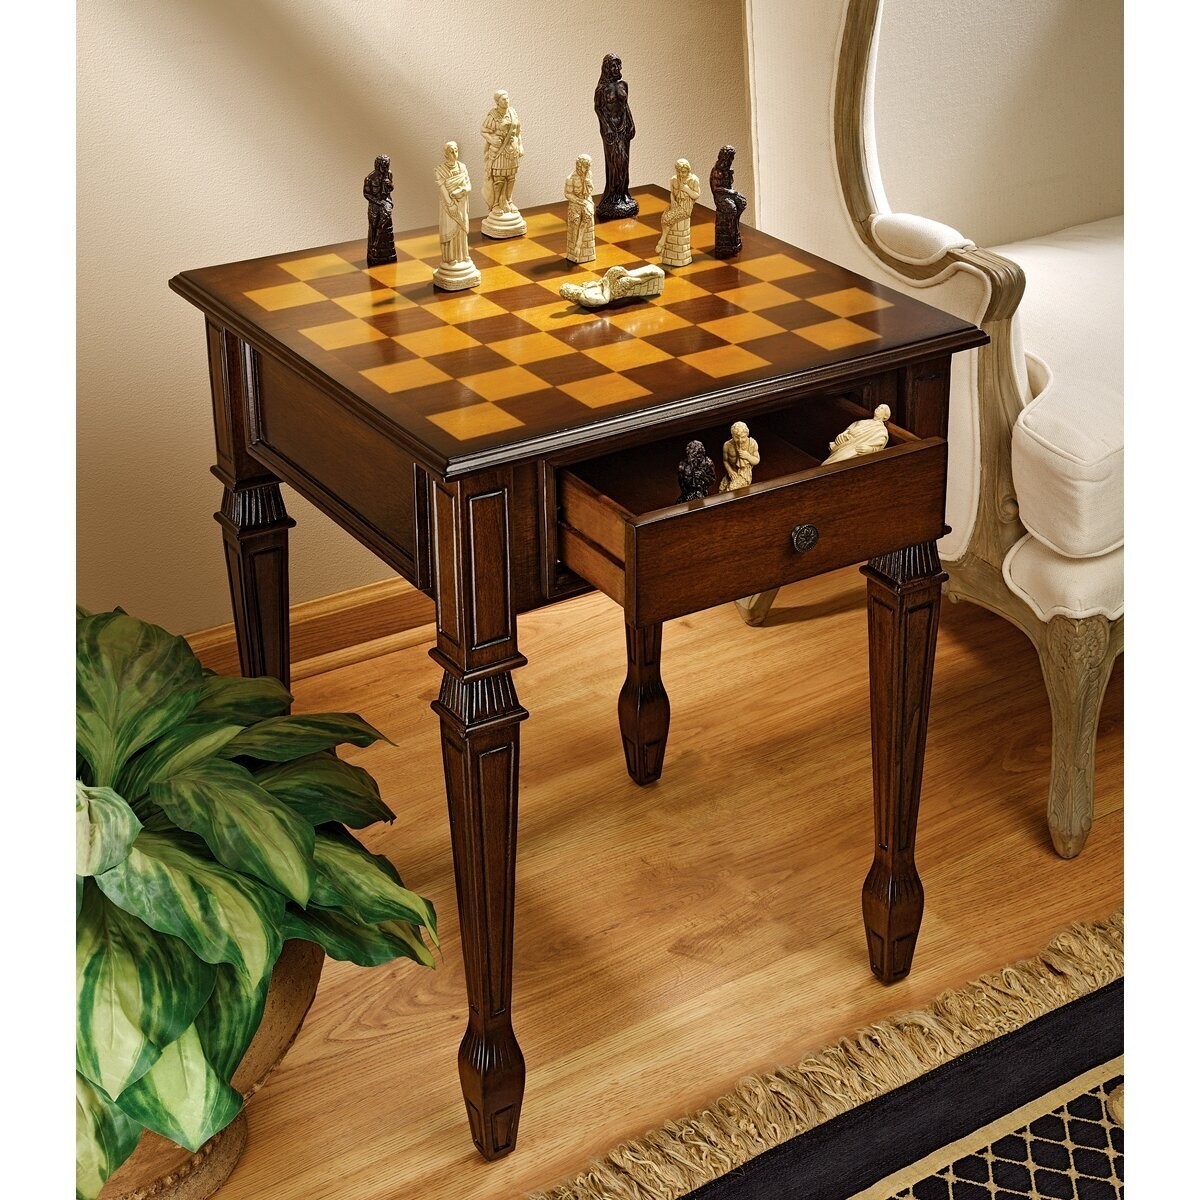 Classic design chess table